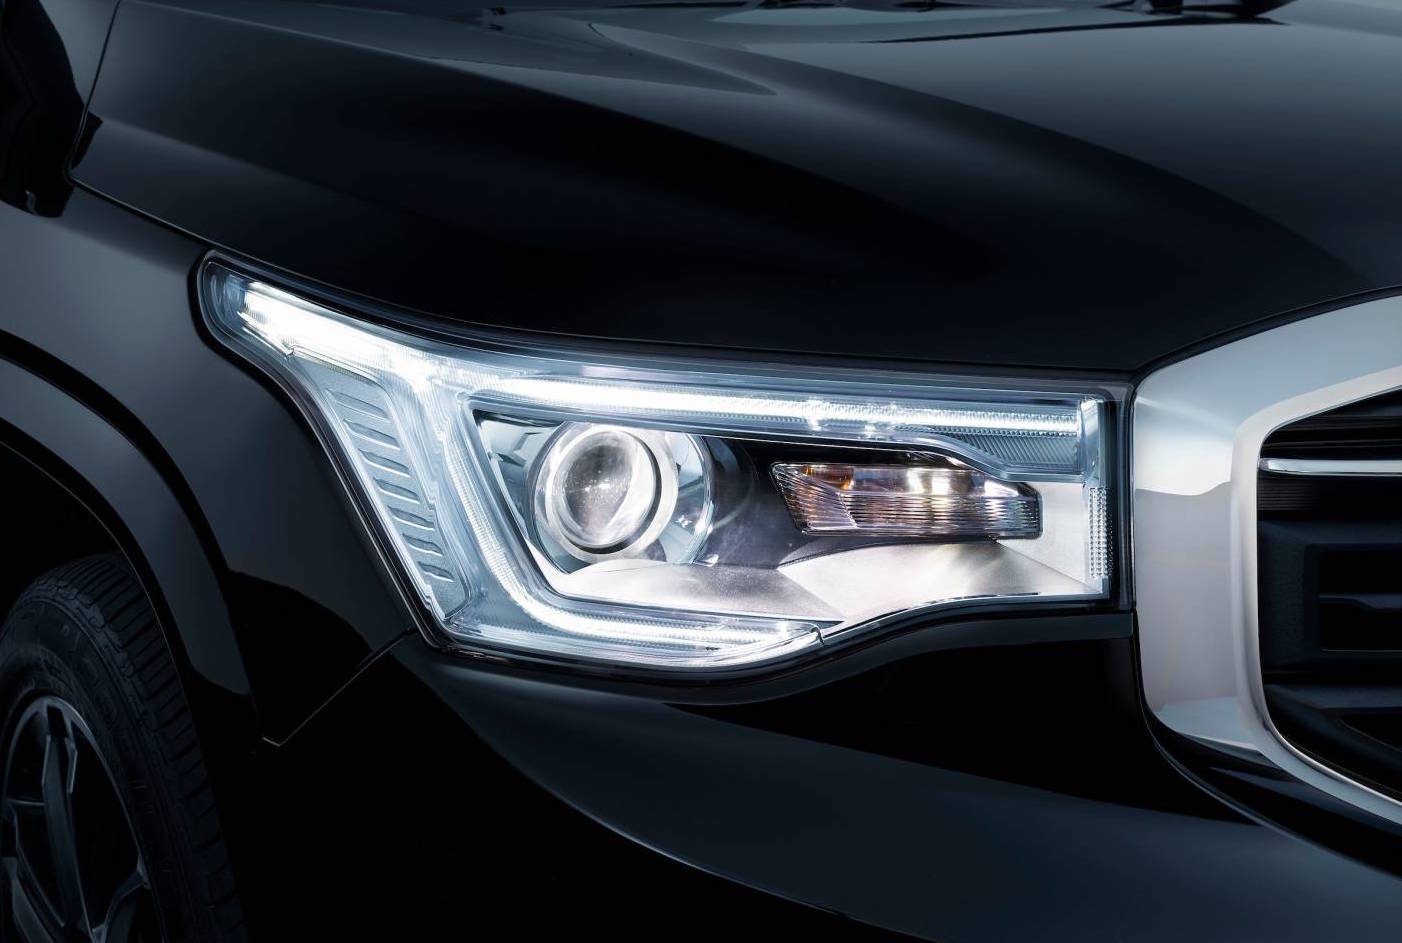 Holden Acadia features and initial specs confirmed